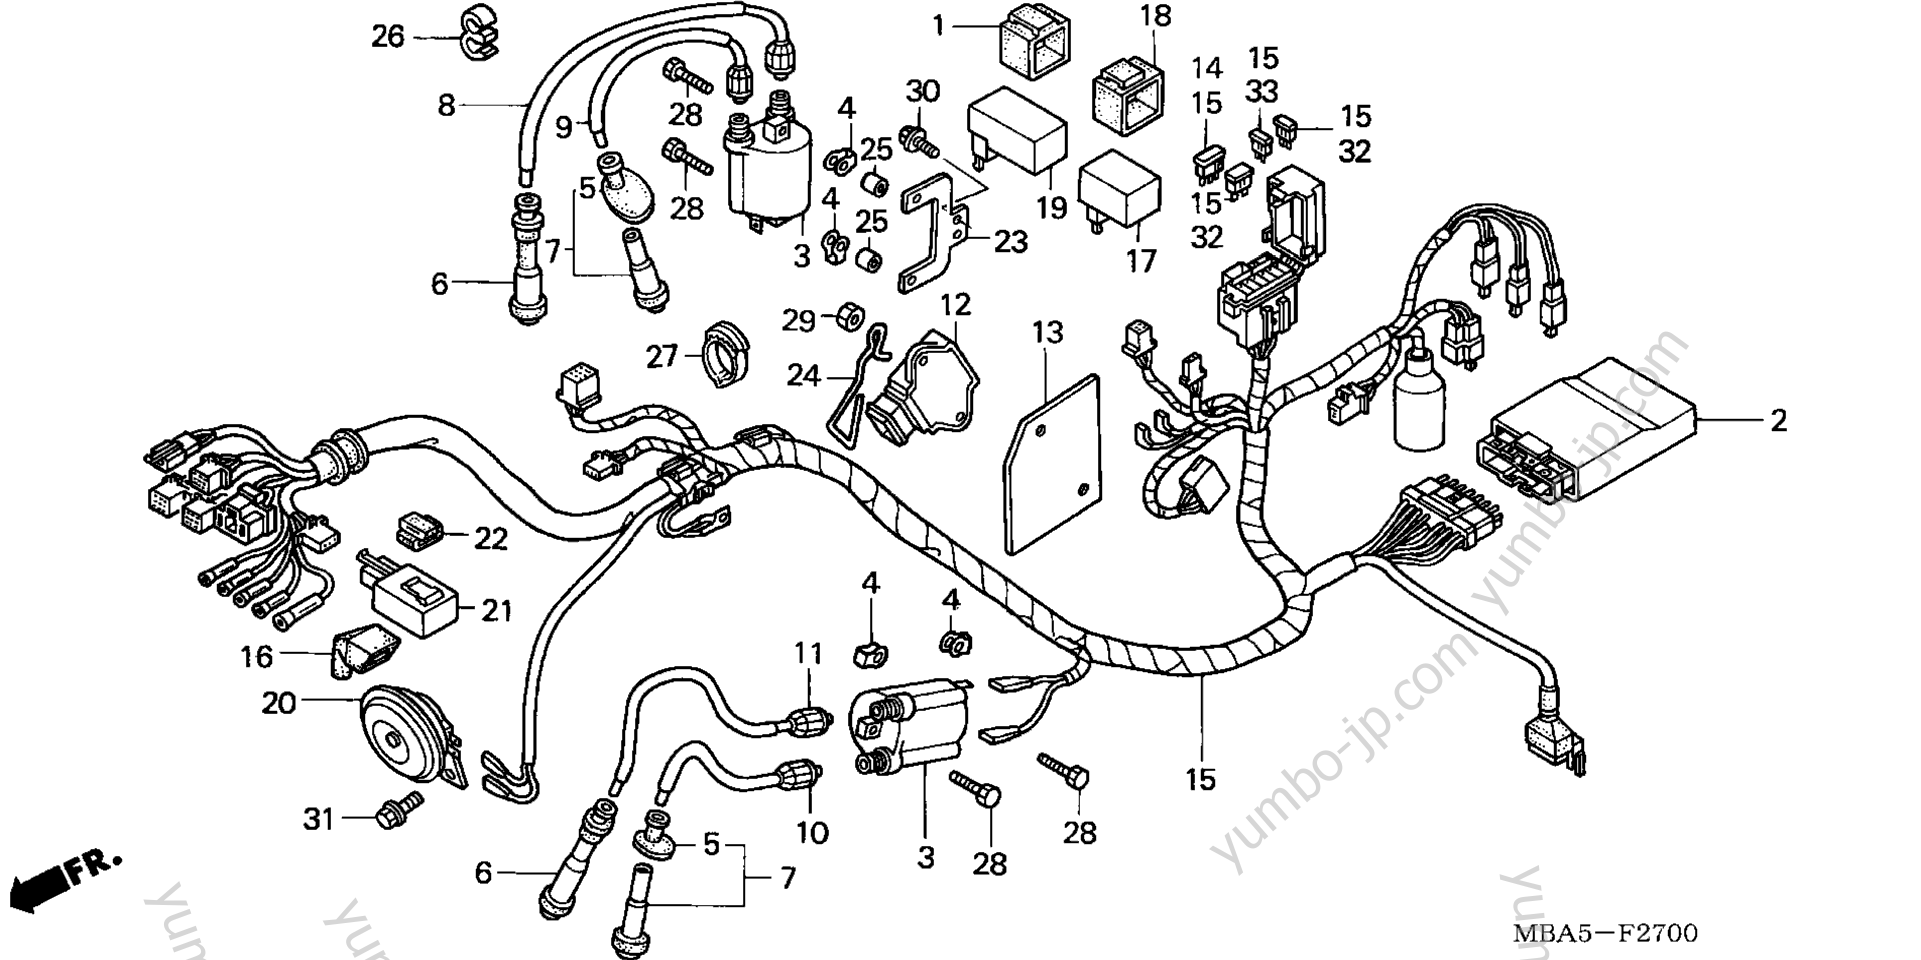 WIRE HARNESS for motorcycles HONDA VT750CDD A 2003 year